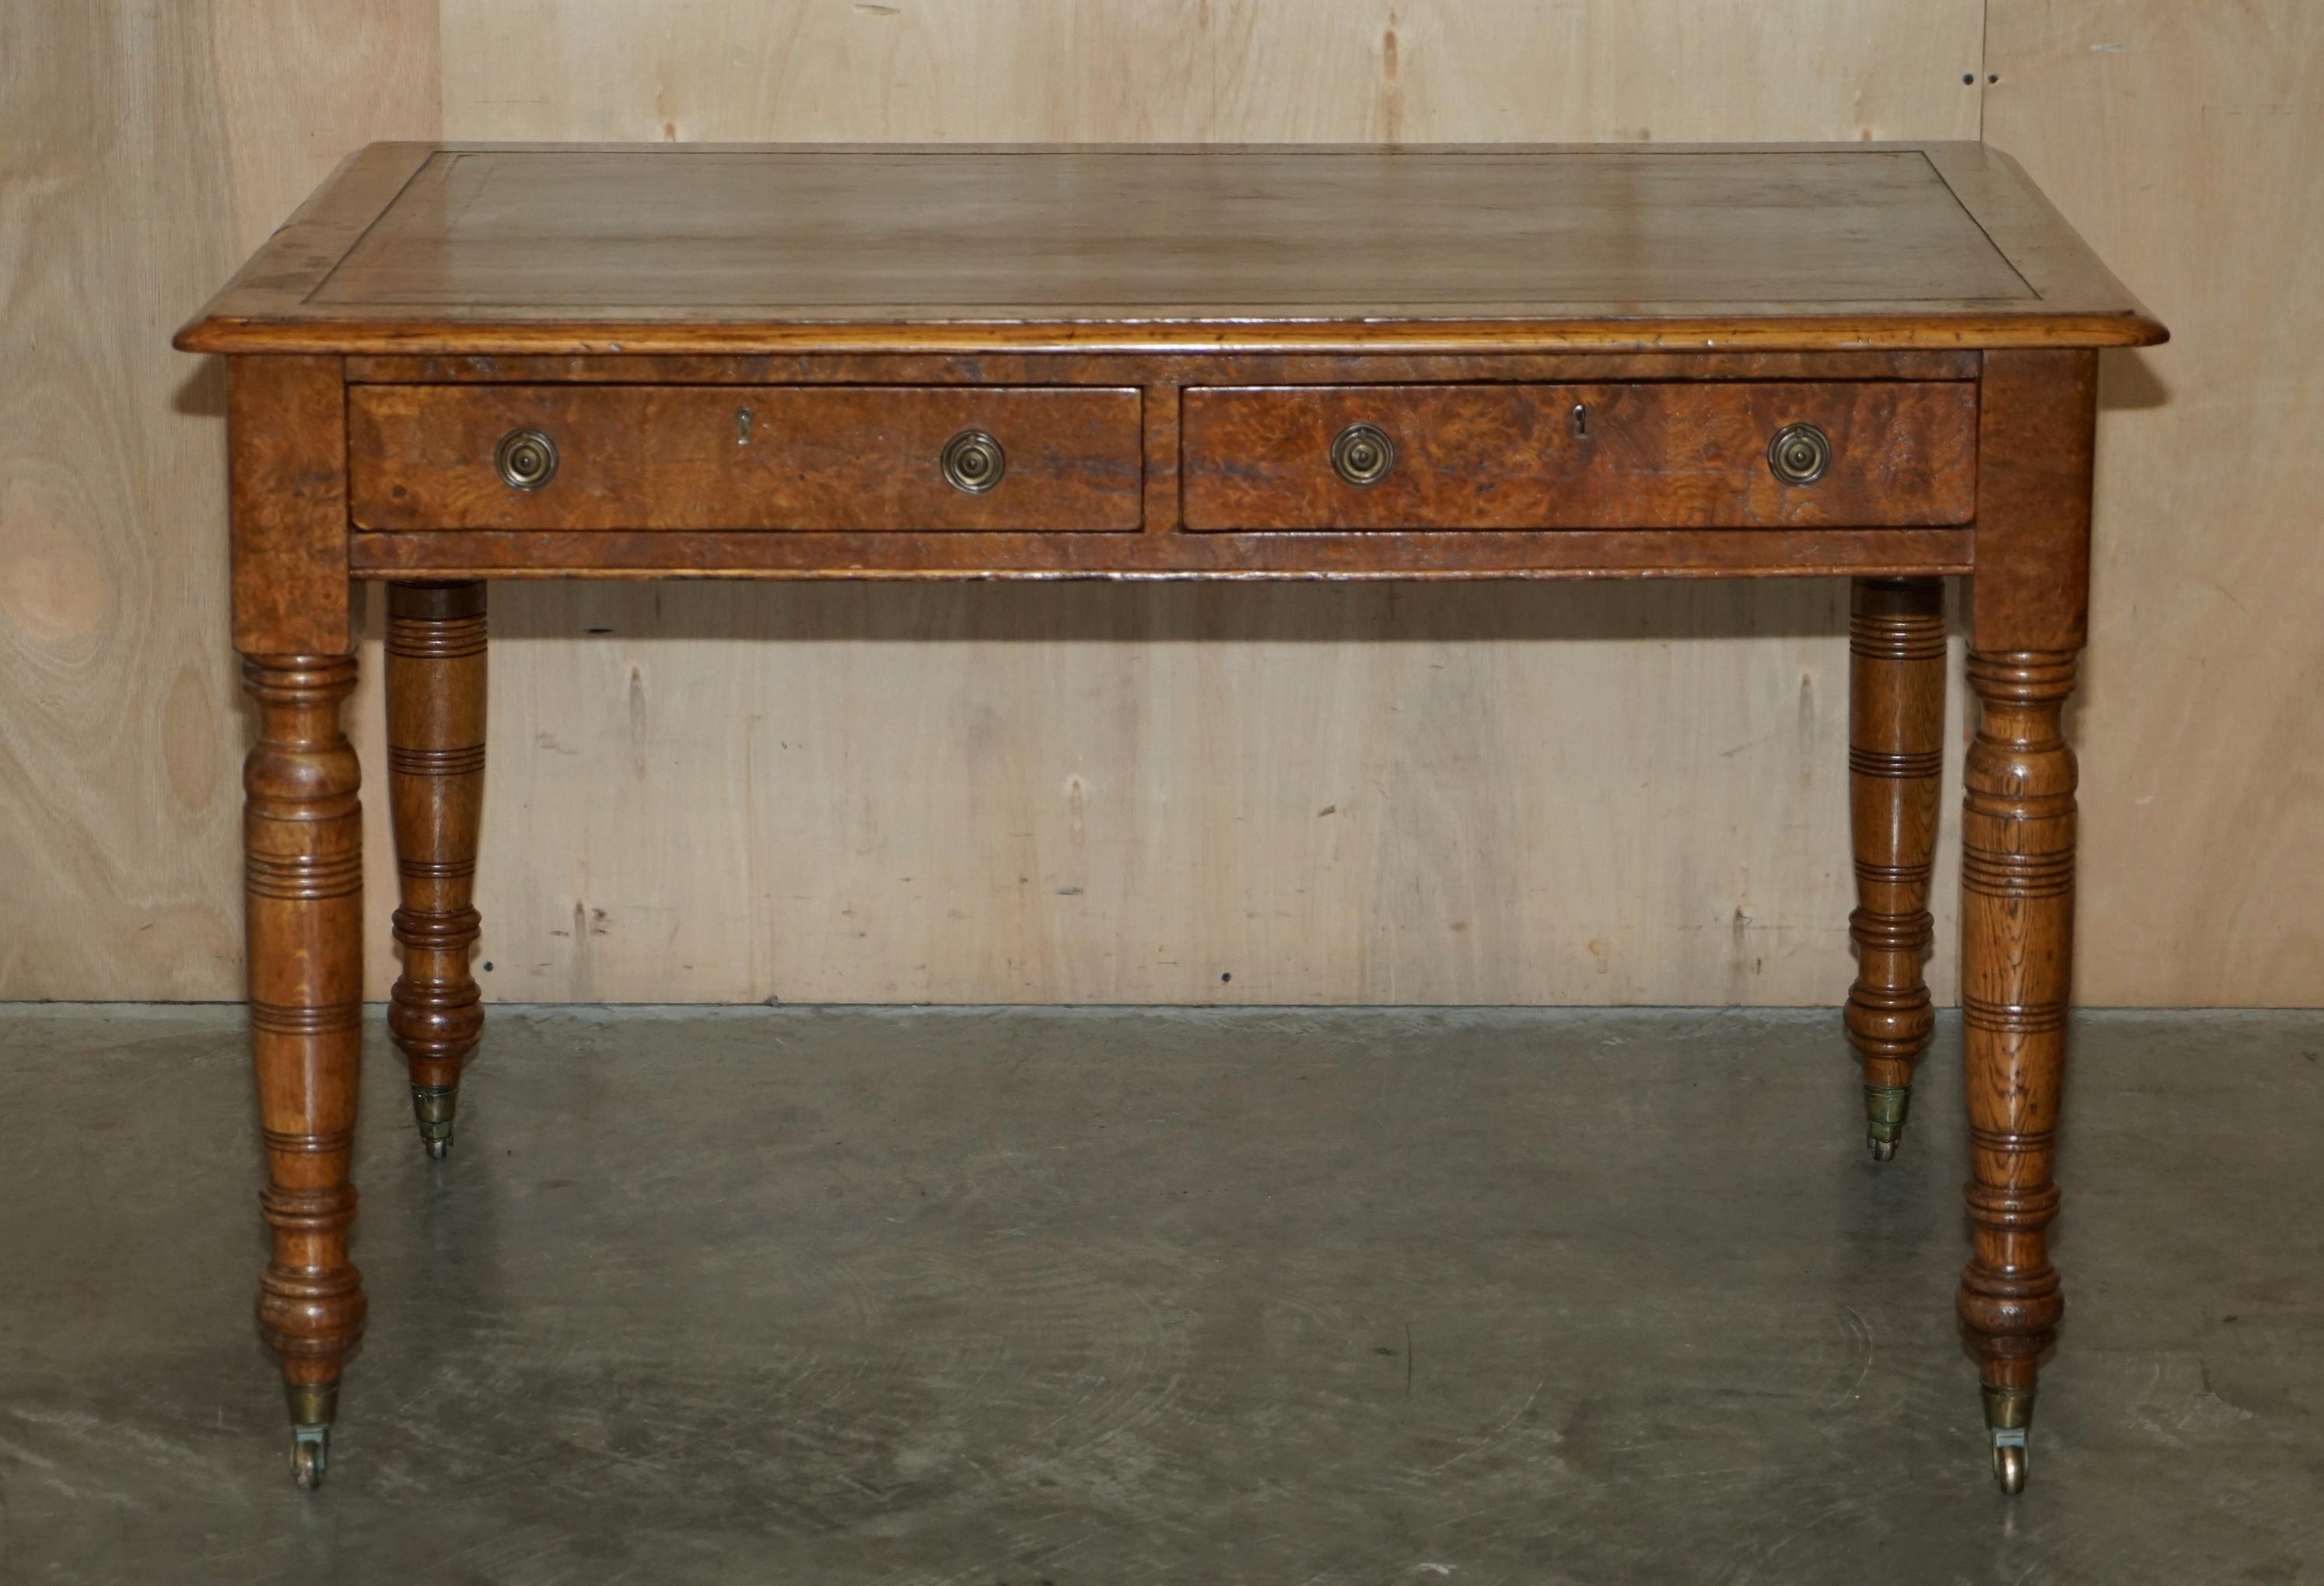 Early Victorian ANTIQUE CIRCA 1840 POLLARD OAK BROWN LEATHER TOP WRiTING LIBRARY TABLE DESK